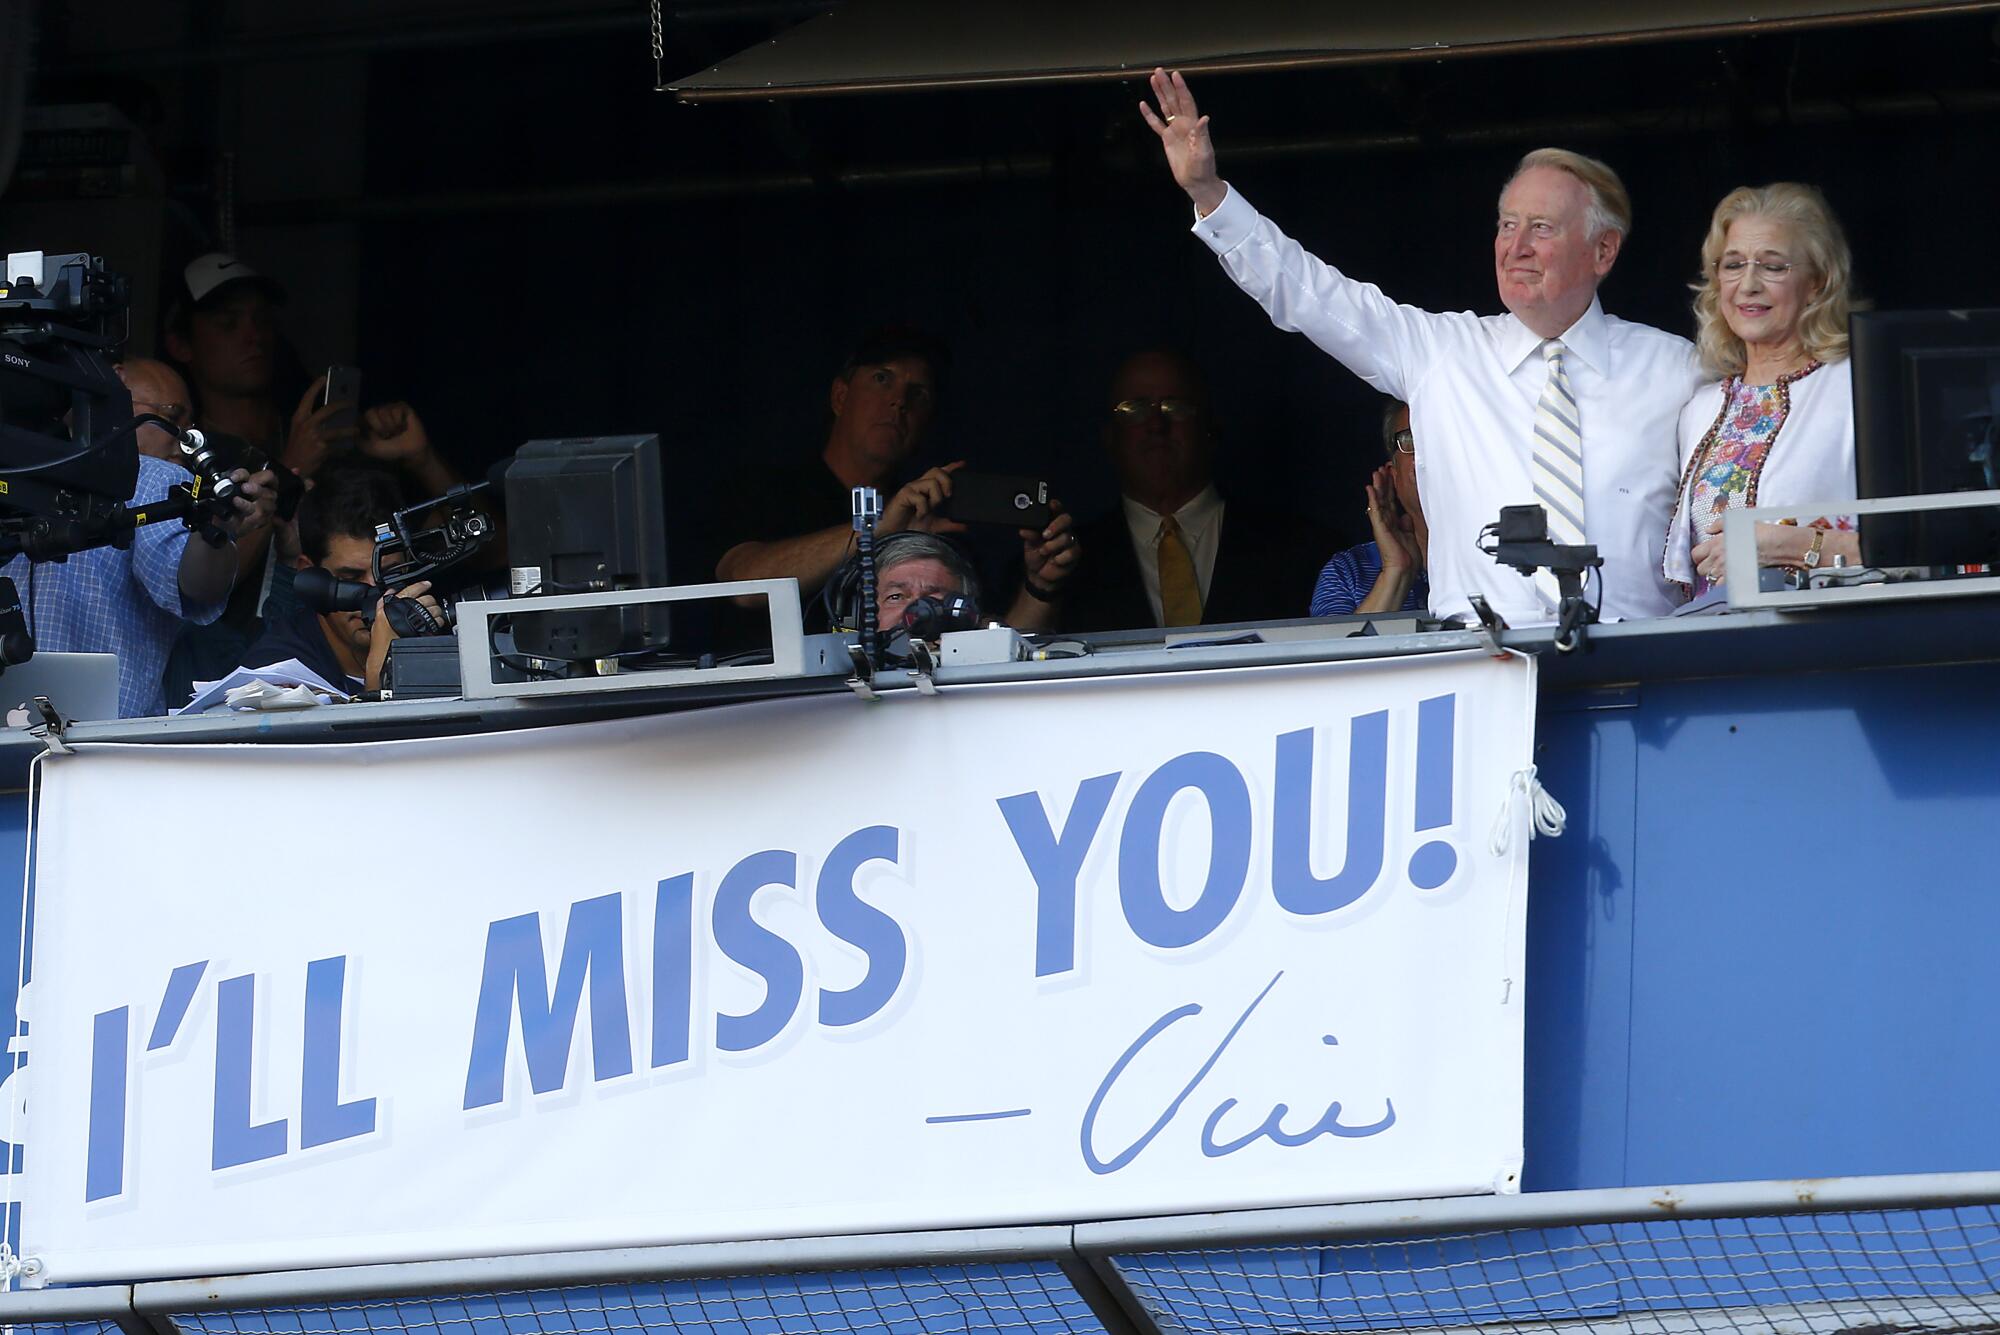 Dodgers broadcaster Vin Scully, with wife Sandra, waves to the fans.